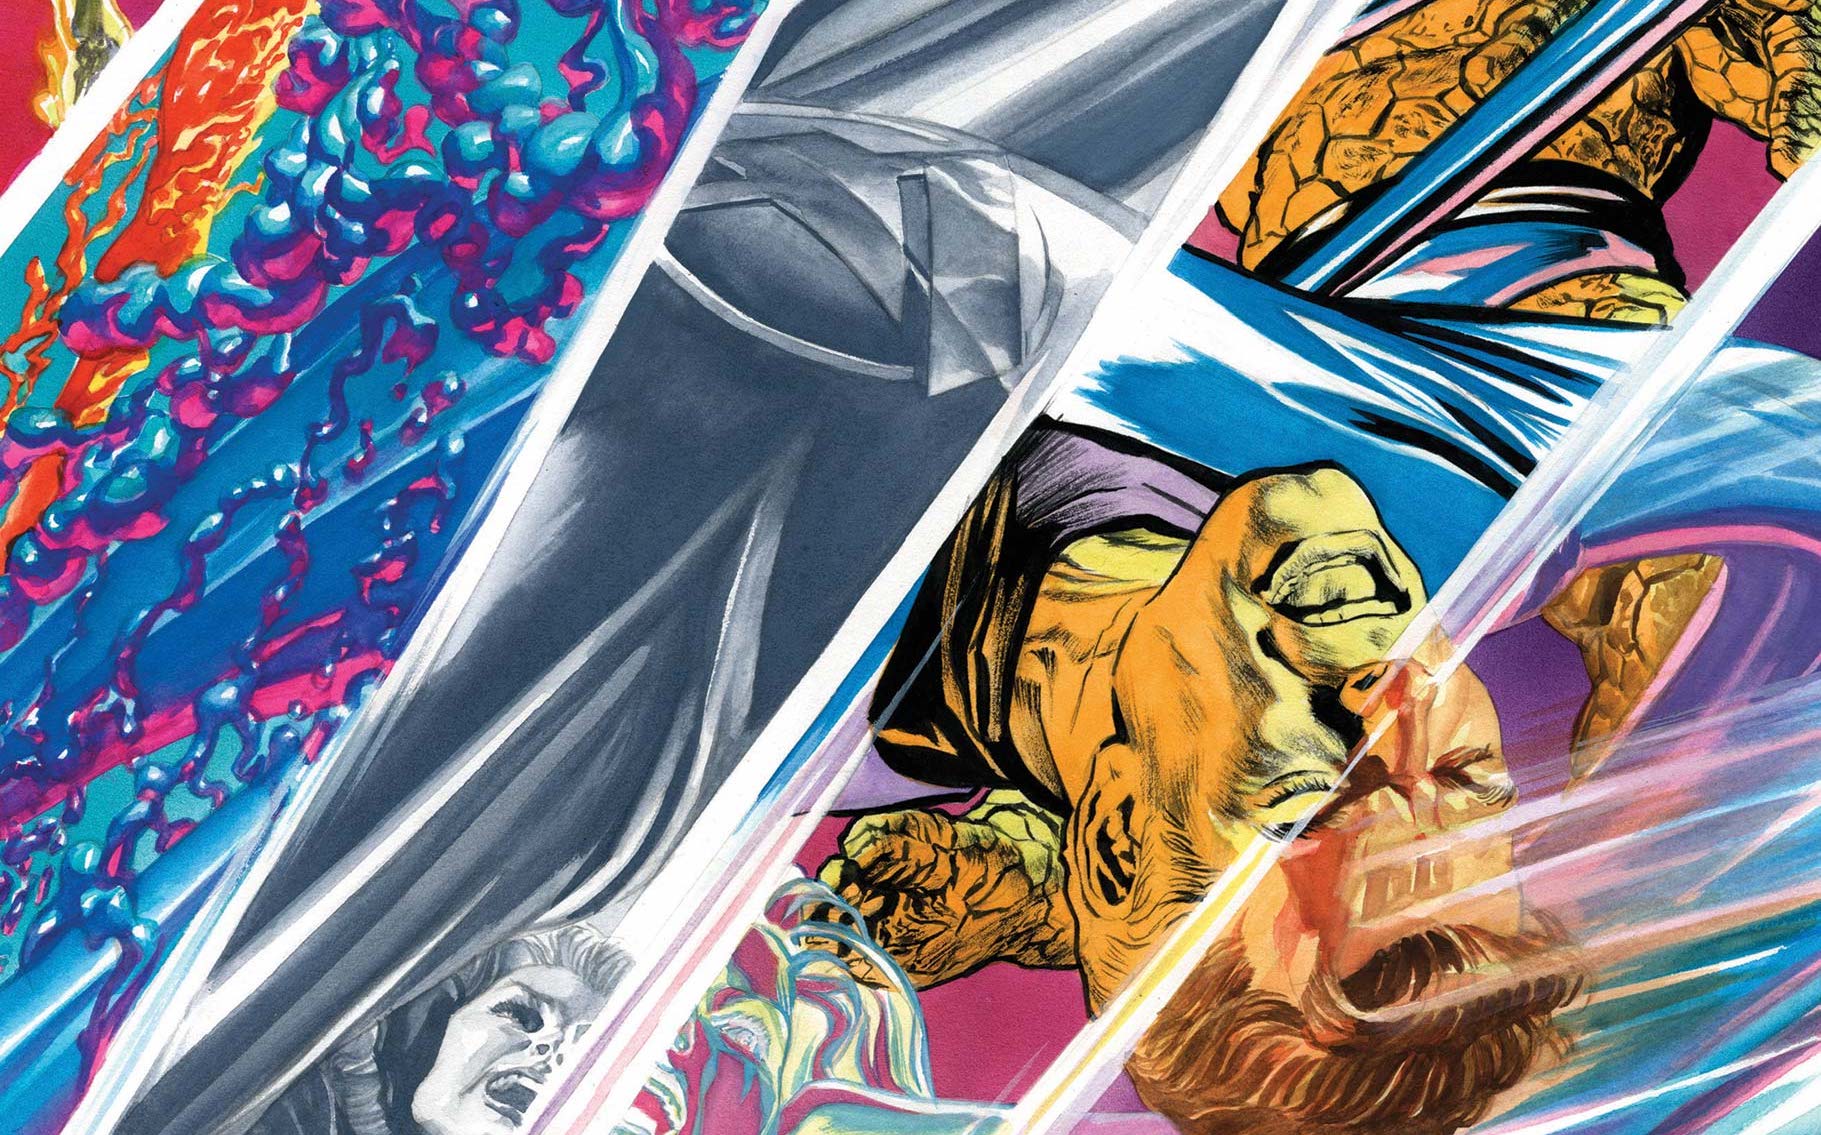 'Fantastic Four' #5 takes a road trip to another dimension